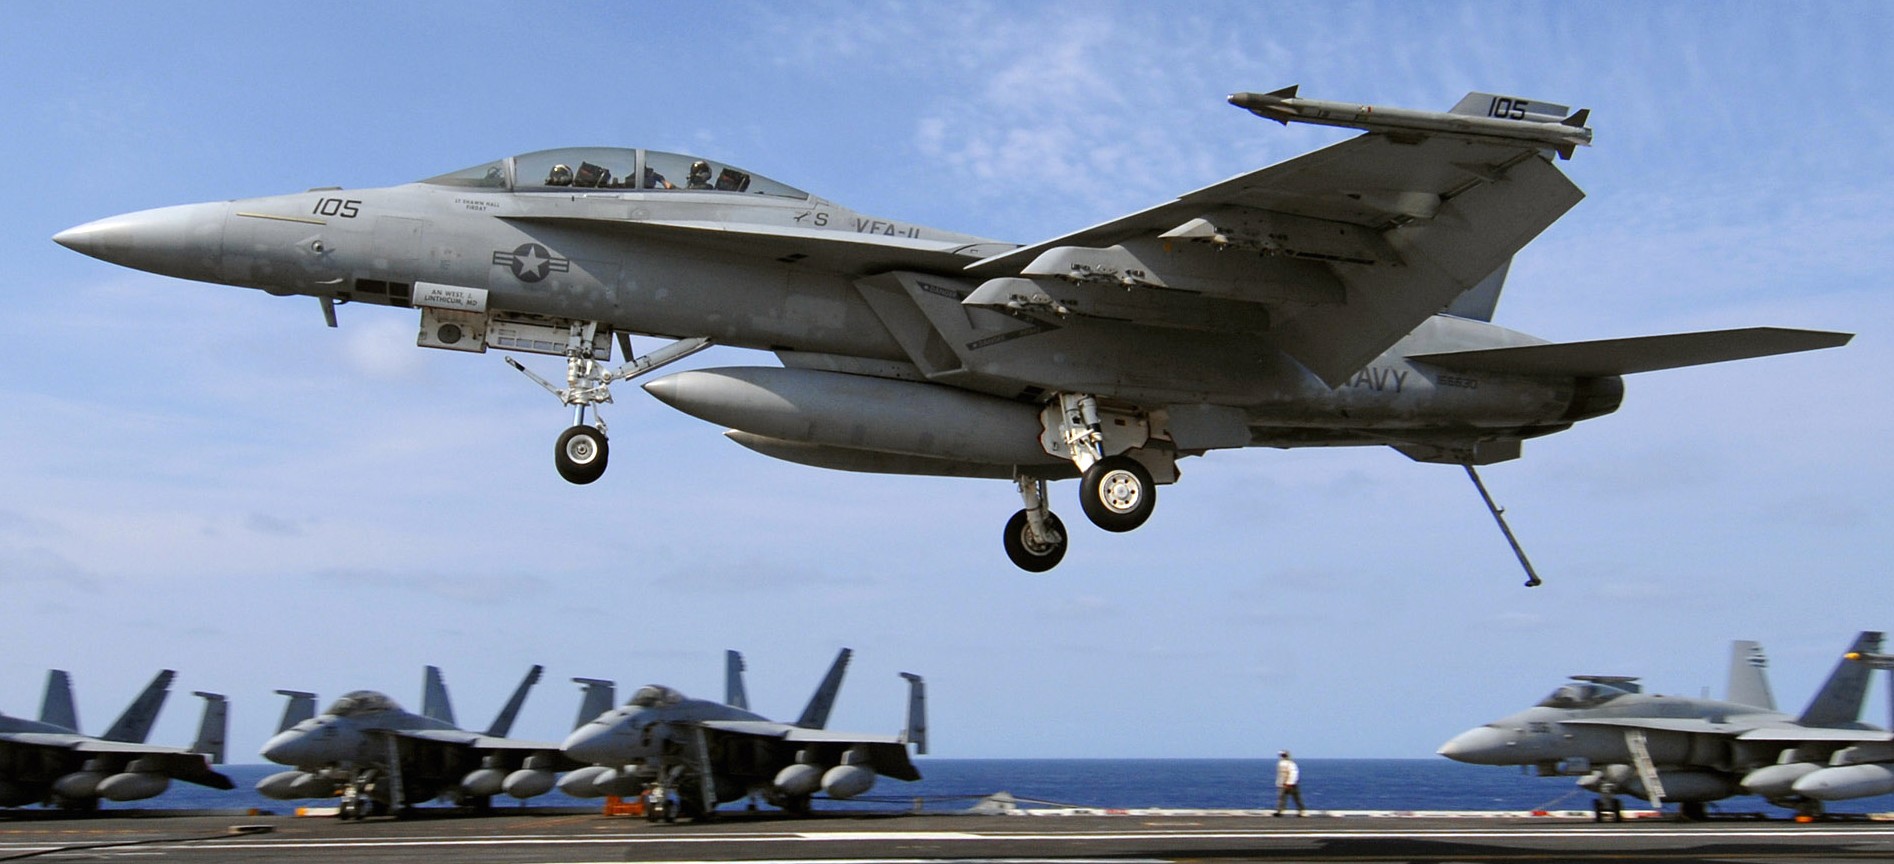 vfa-11 red rippers strike fighter squadron us navy f/a-18f super hornet carrier air wing cvw-3 uss harry s. truman cvn-75 62